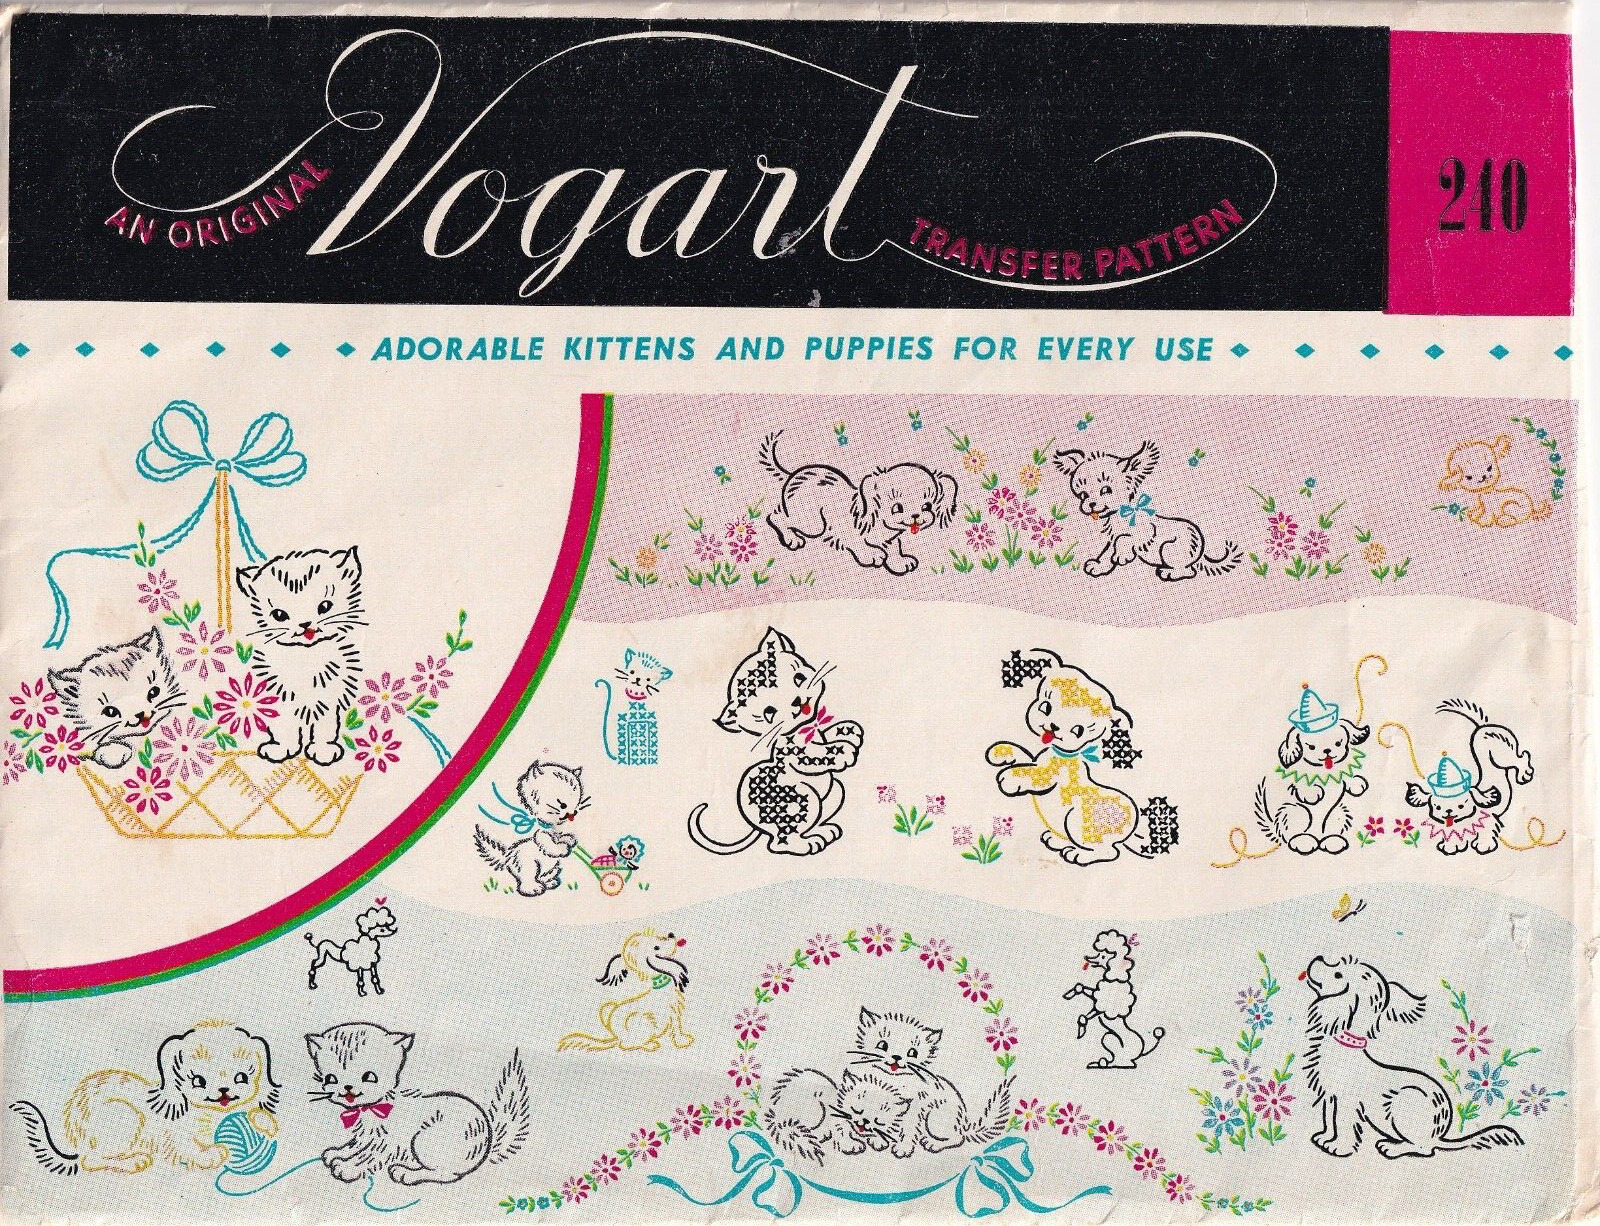 Vintage Vogart Transfer Pattern 240 Adorable Puppies & Kittens for Every Use